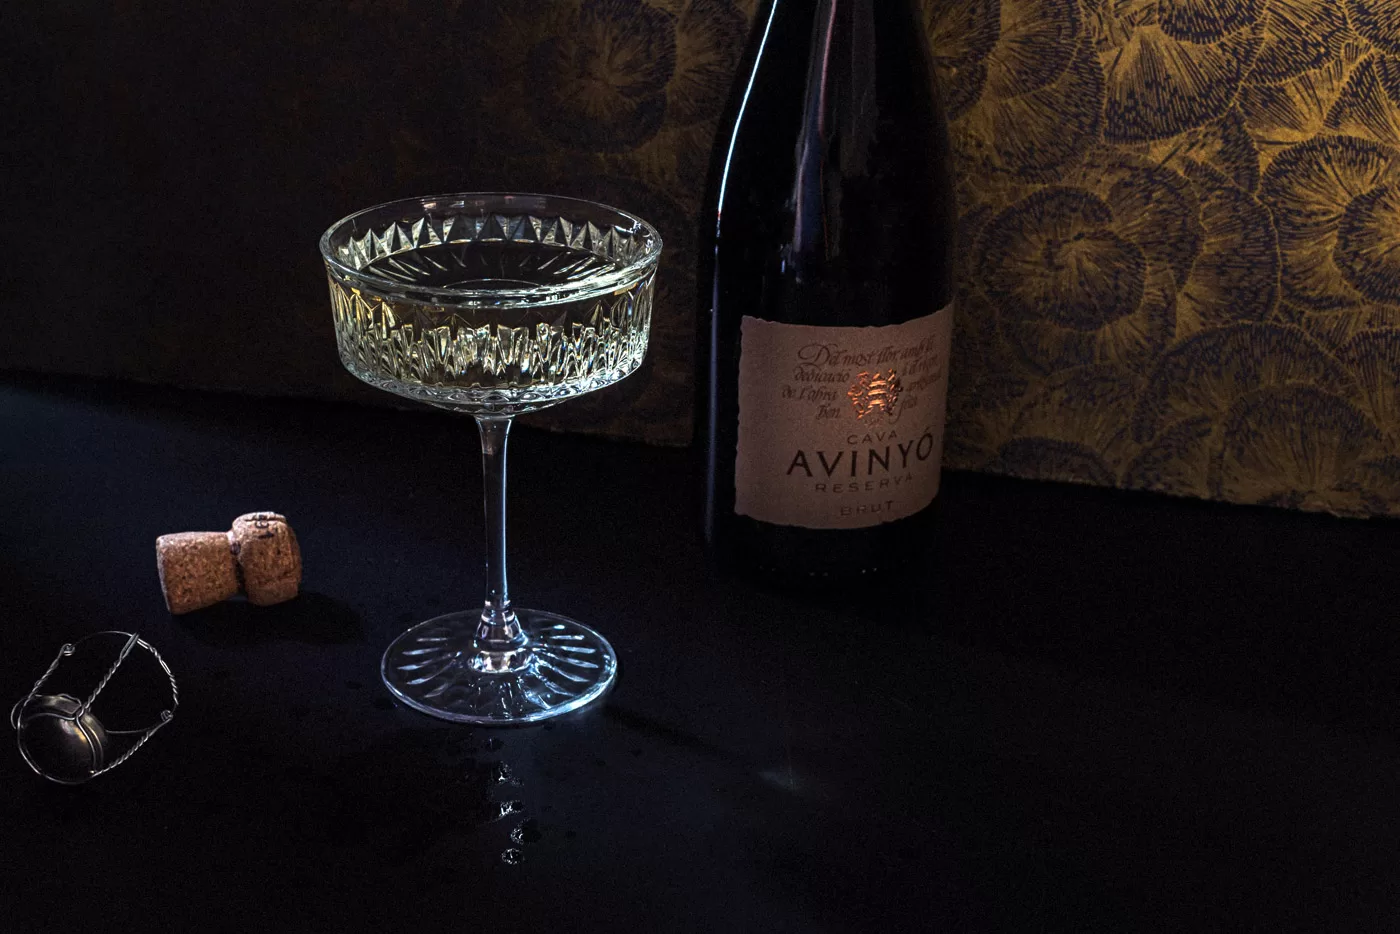 Avinyo bottle with an art deco glass full of champagne. Dark dramatic natural light. Chicago drink photographer